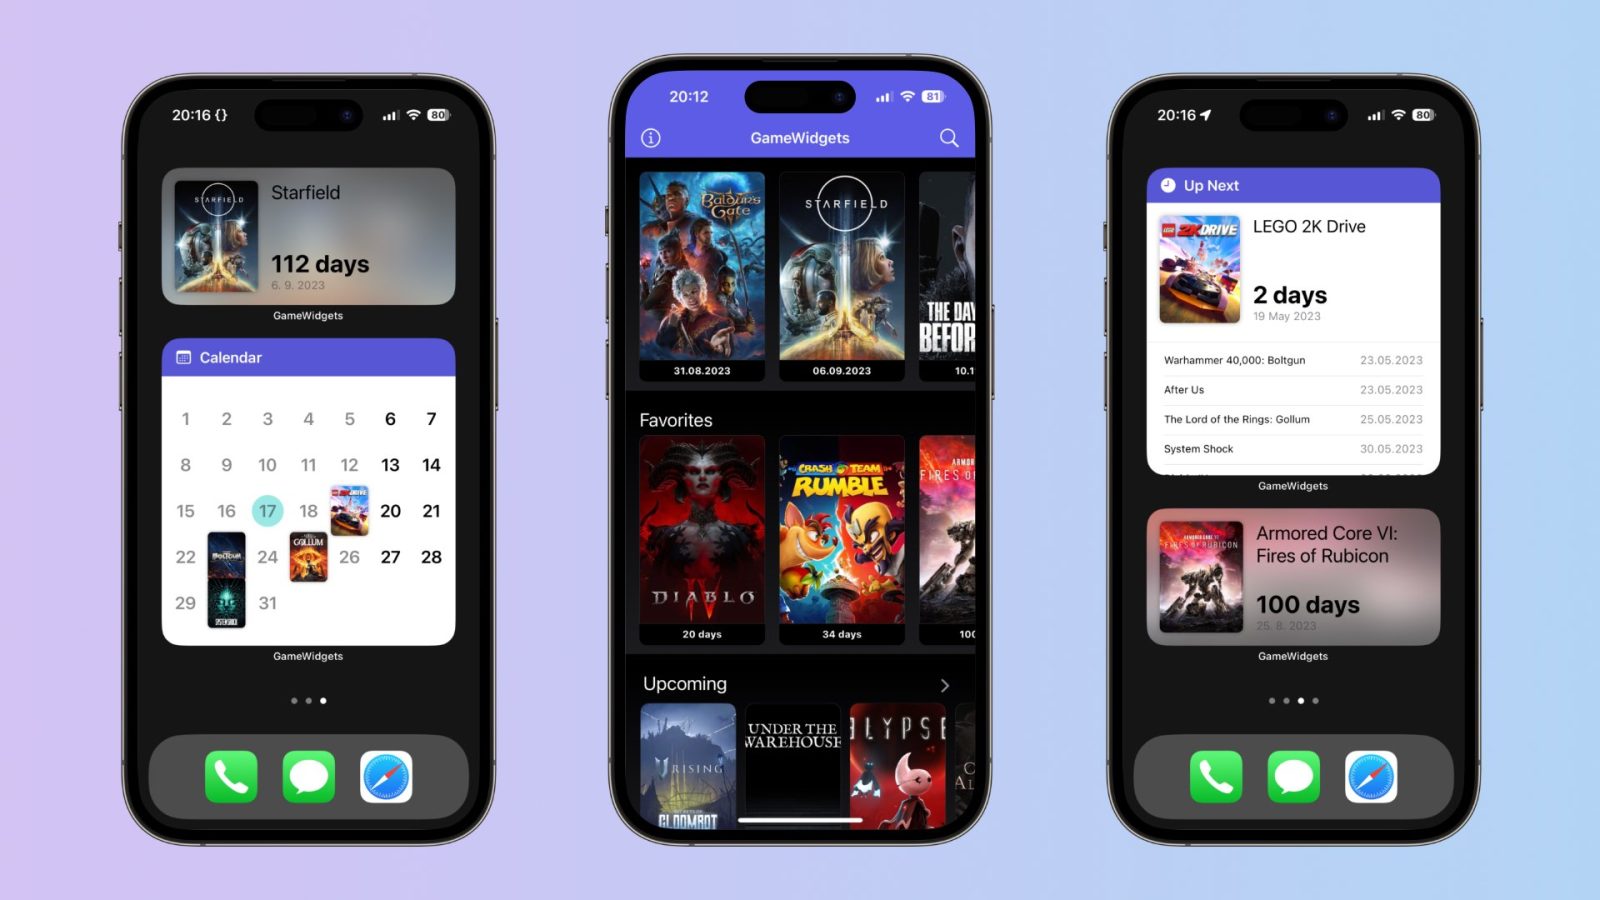 Game Widgets for iPhone makes it easy to discover and track your favorite releases